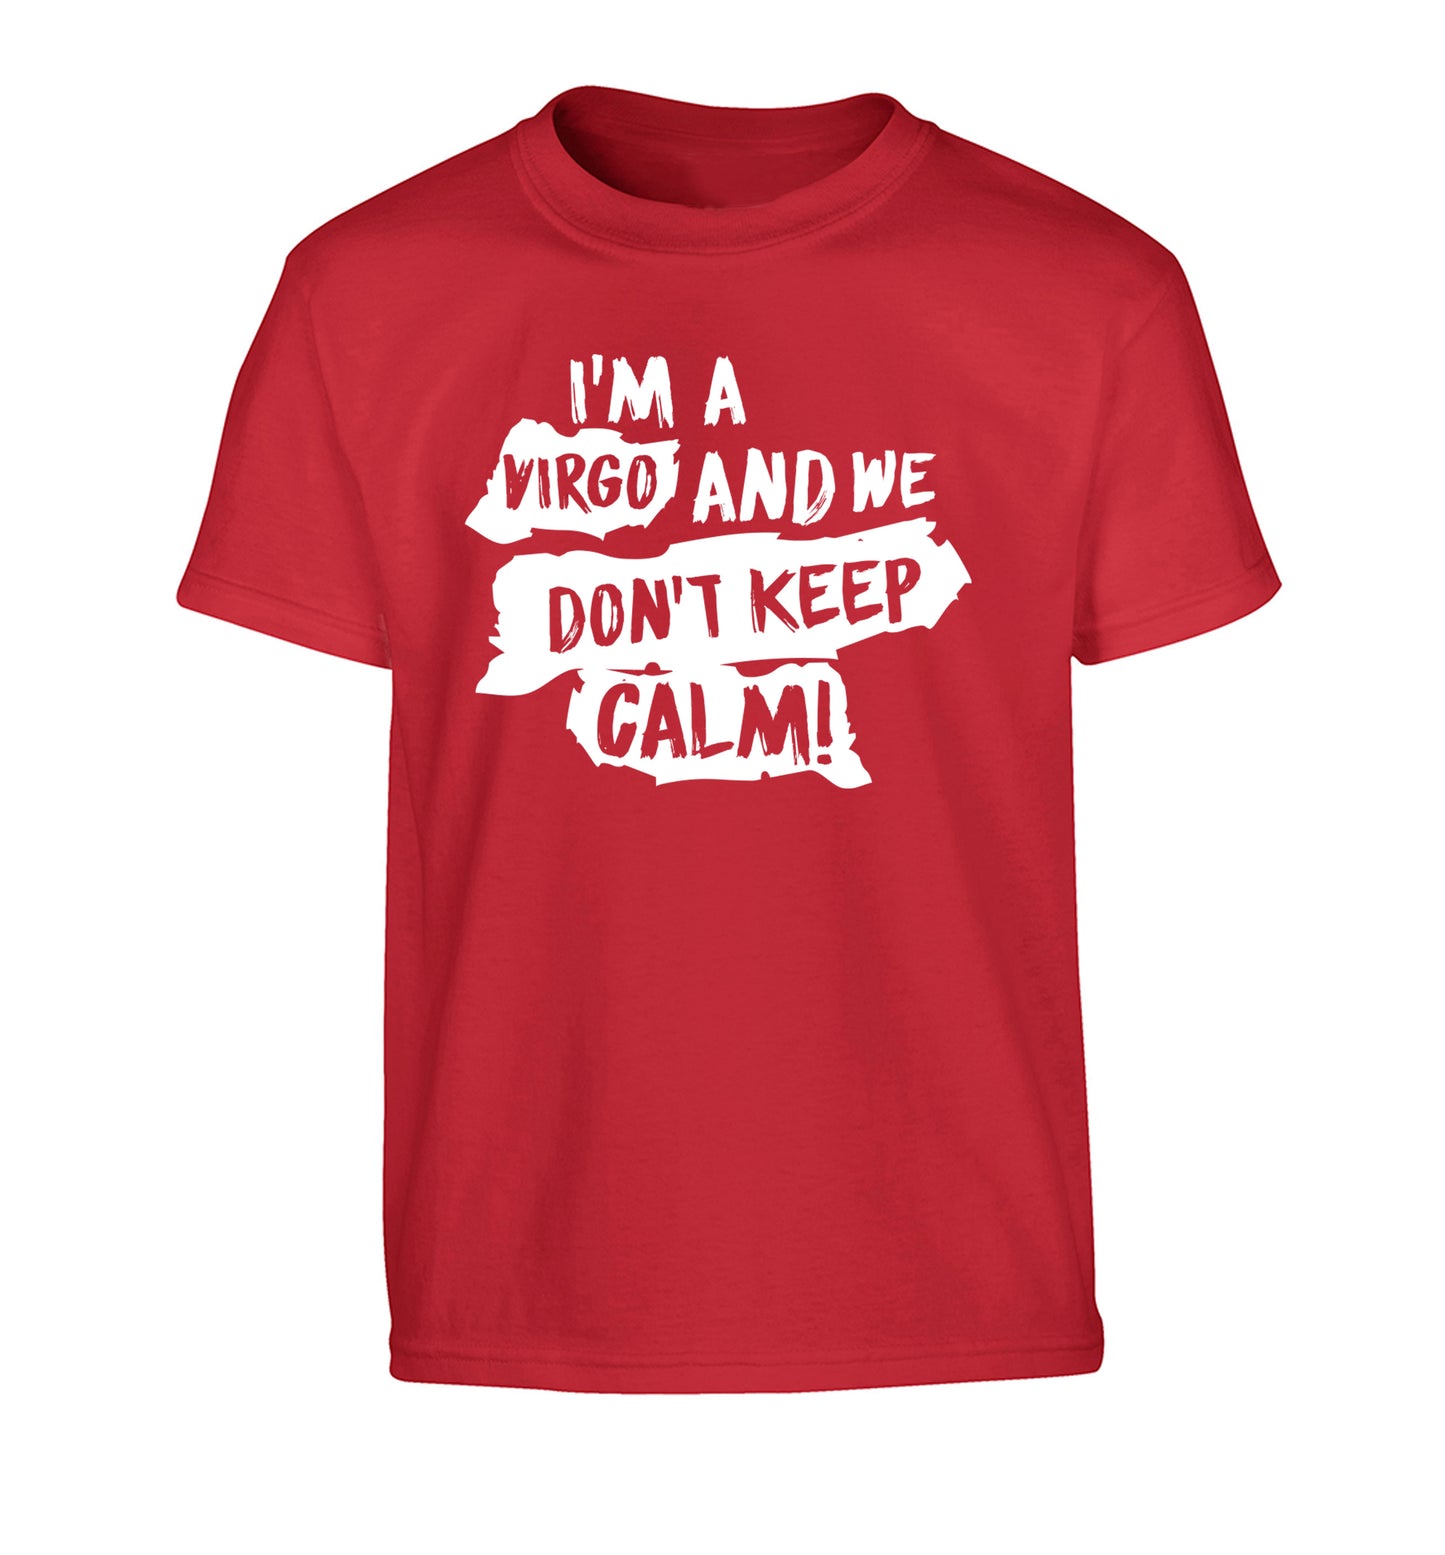 I'm a virgo and we don't keep calm Children's red Tshirt 12-13 Years